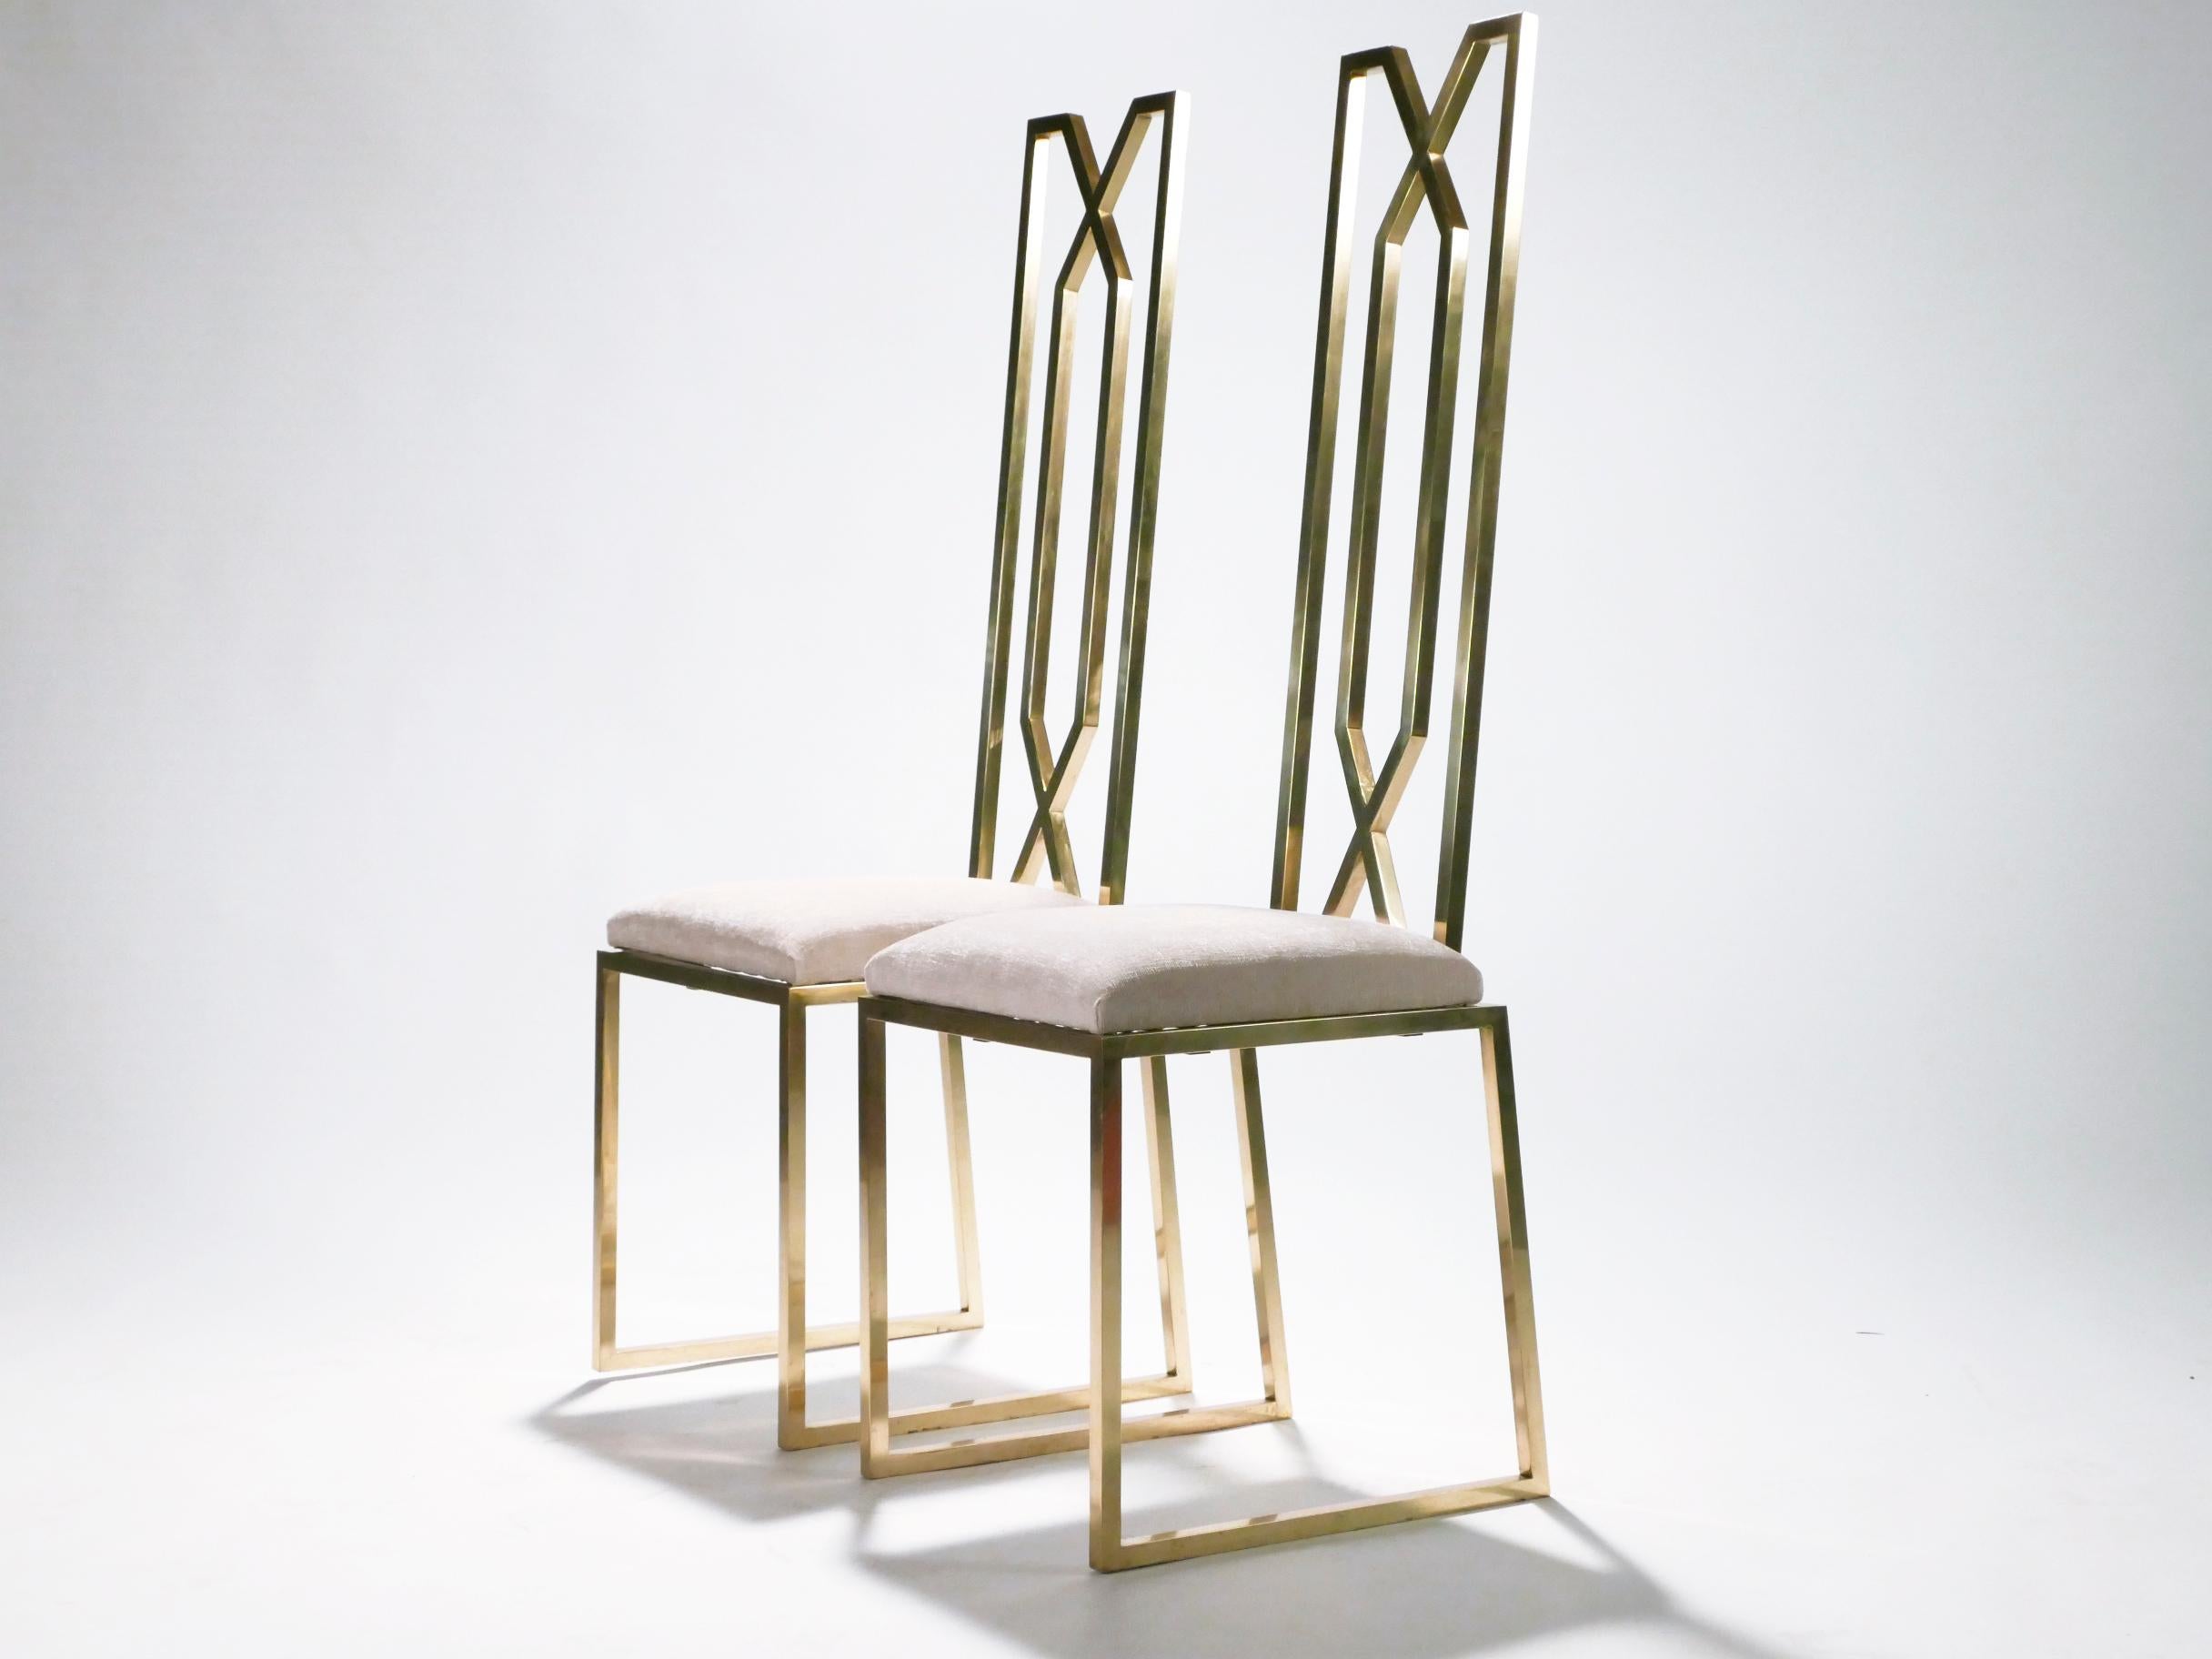 Designer Willy Rizzo’s noble and extravagant tastes are evident in this pair of Hollywood Regency chairs. Cool brass is fashioned into an inventive, geometric design that towers high above the newly upholstered, textured cotton seats. The bright